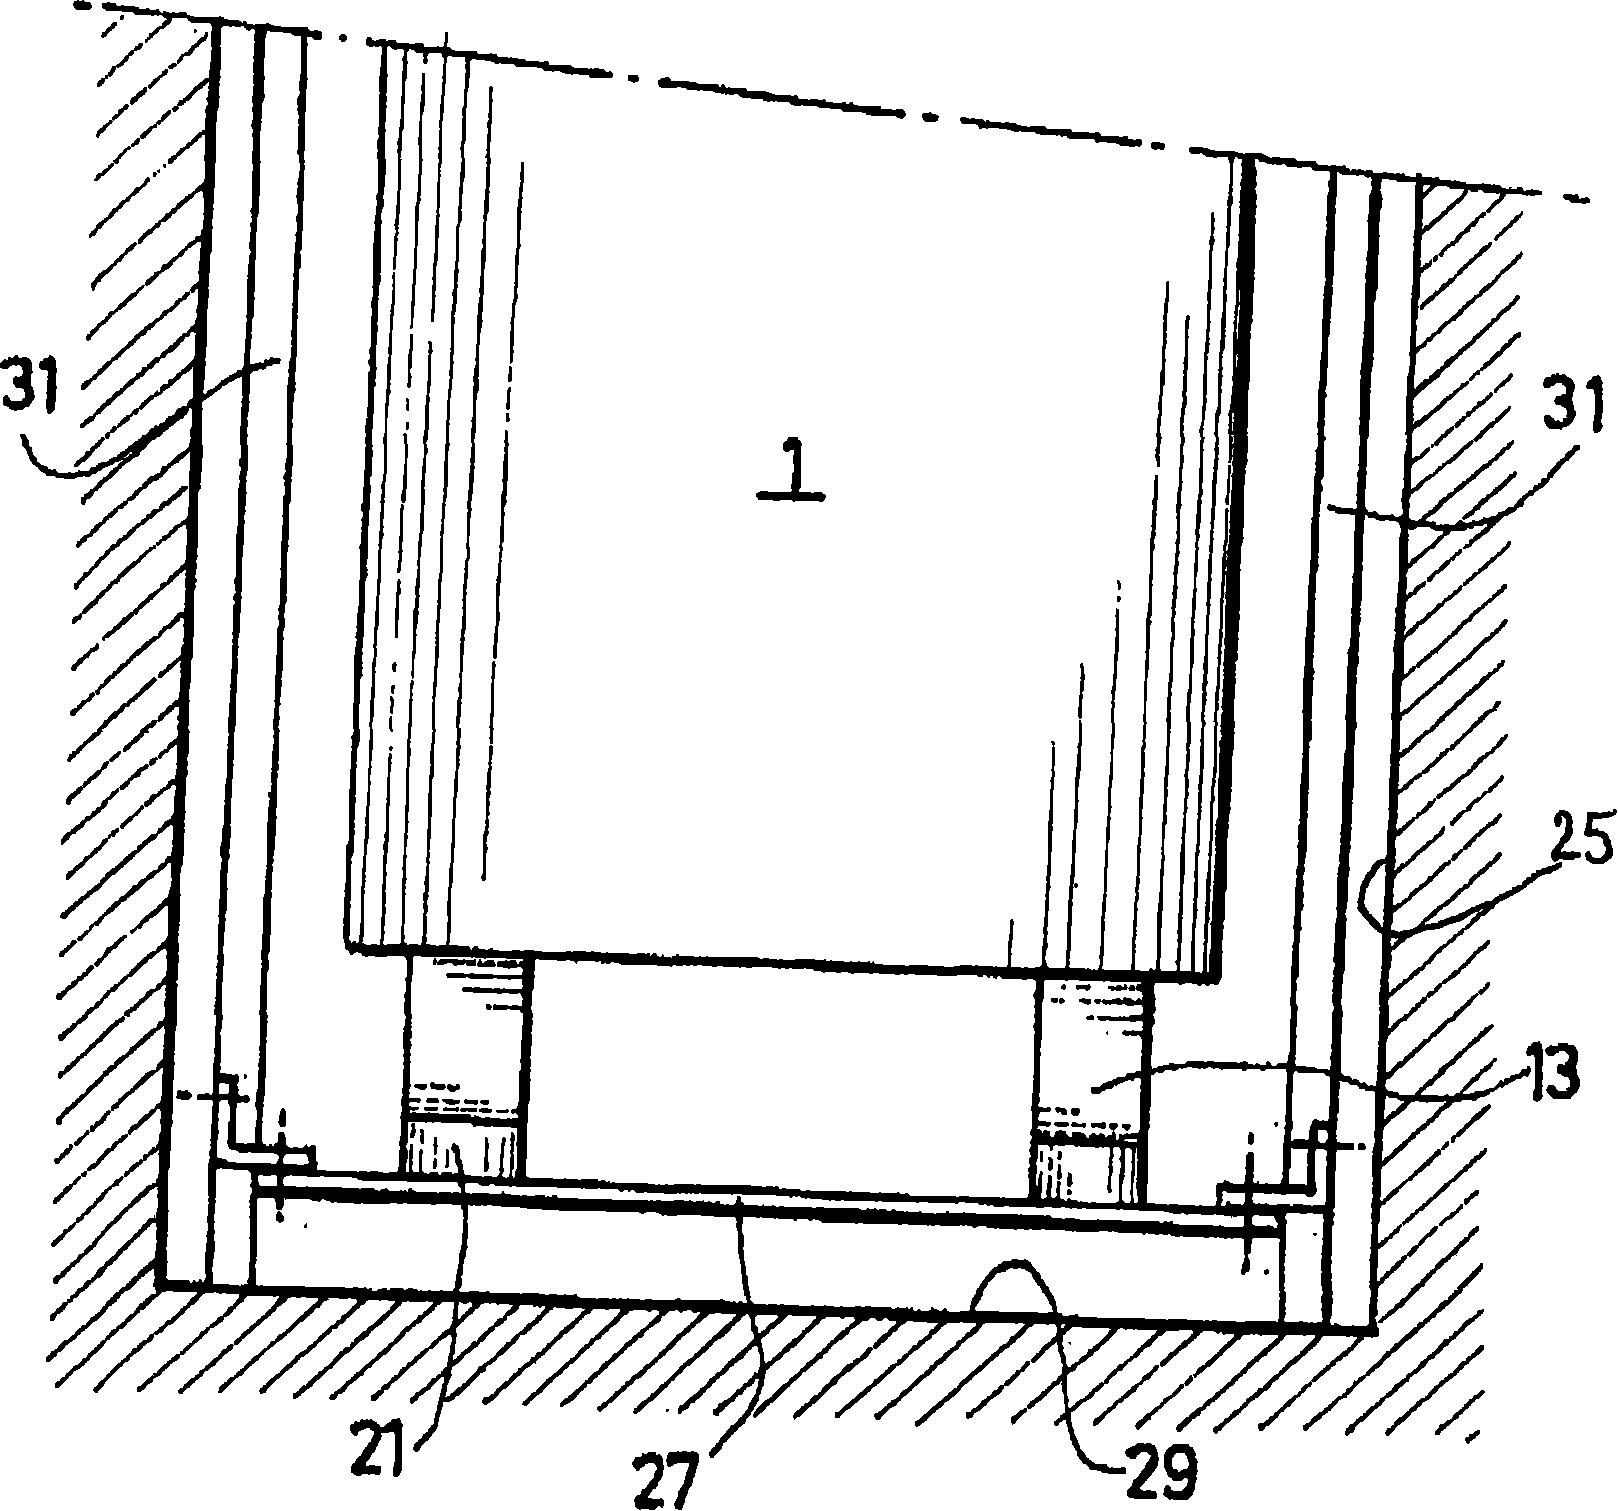 Elevator car with fold-away shock absorbing legs, and the corresponding elevator